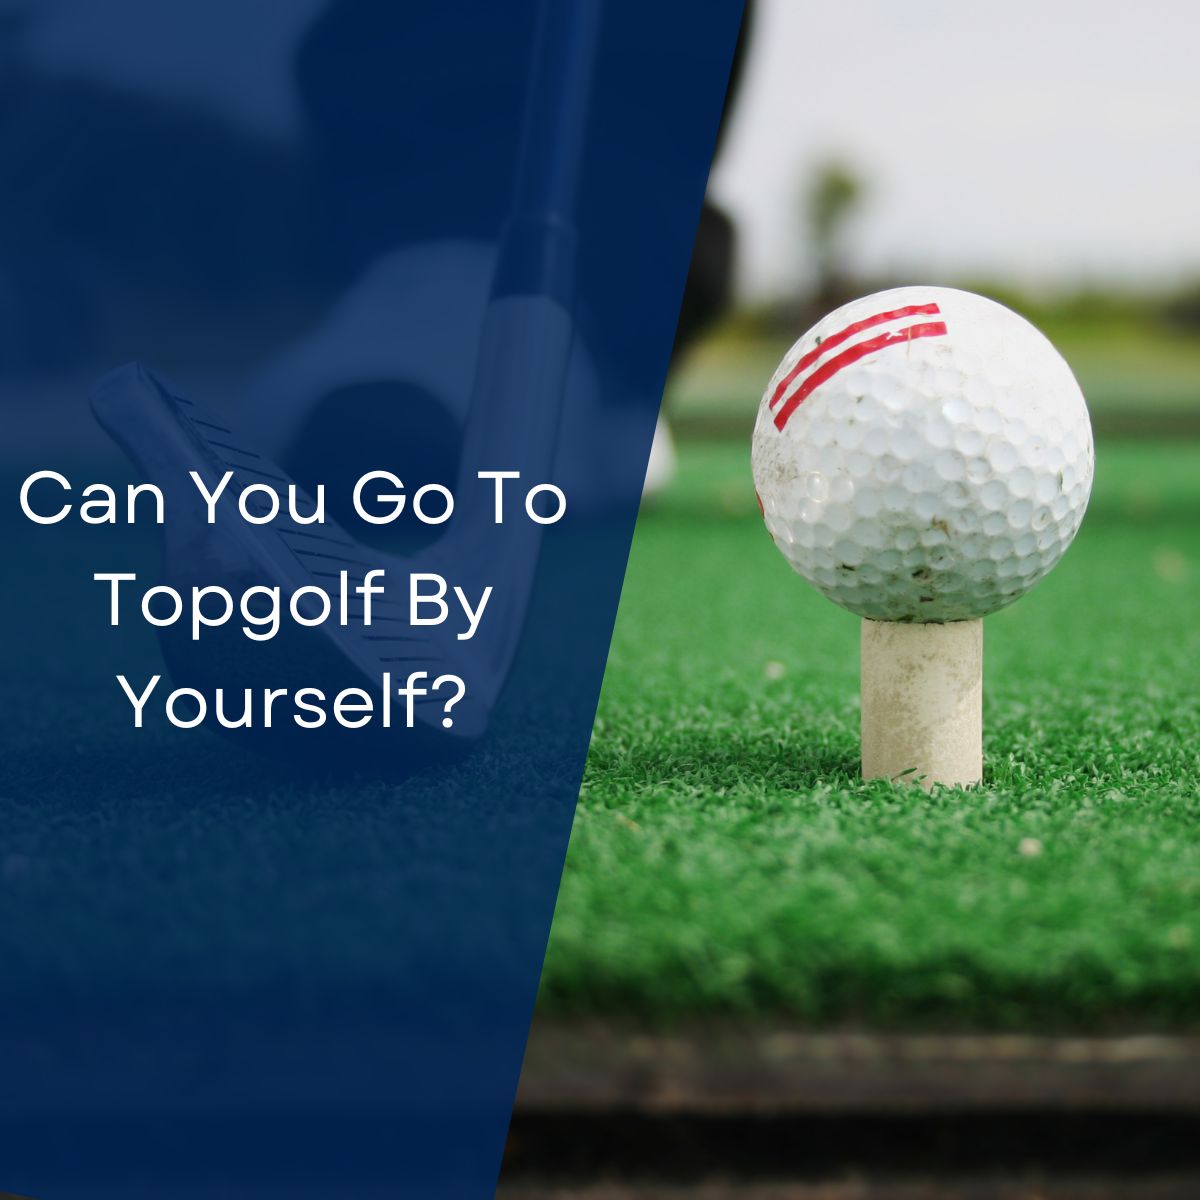 Can You Go To Topgolf By Yourself?